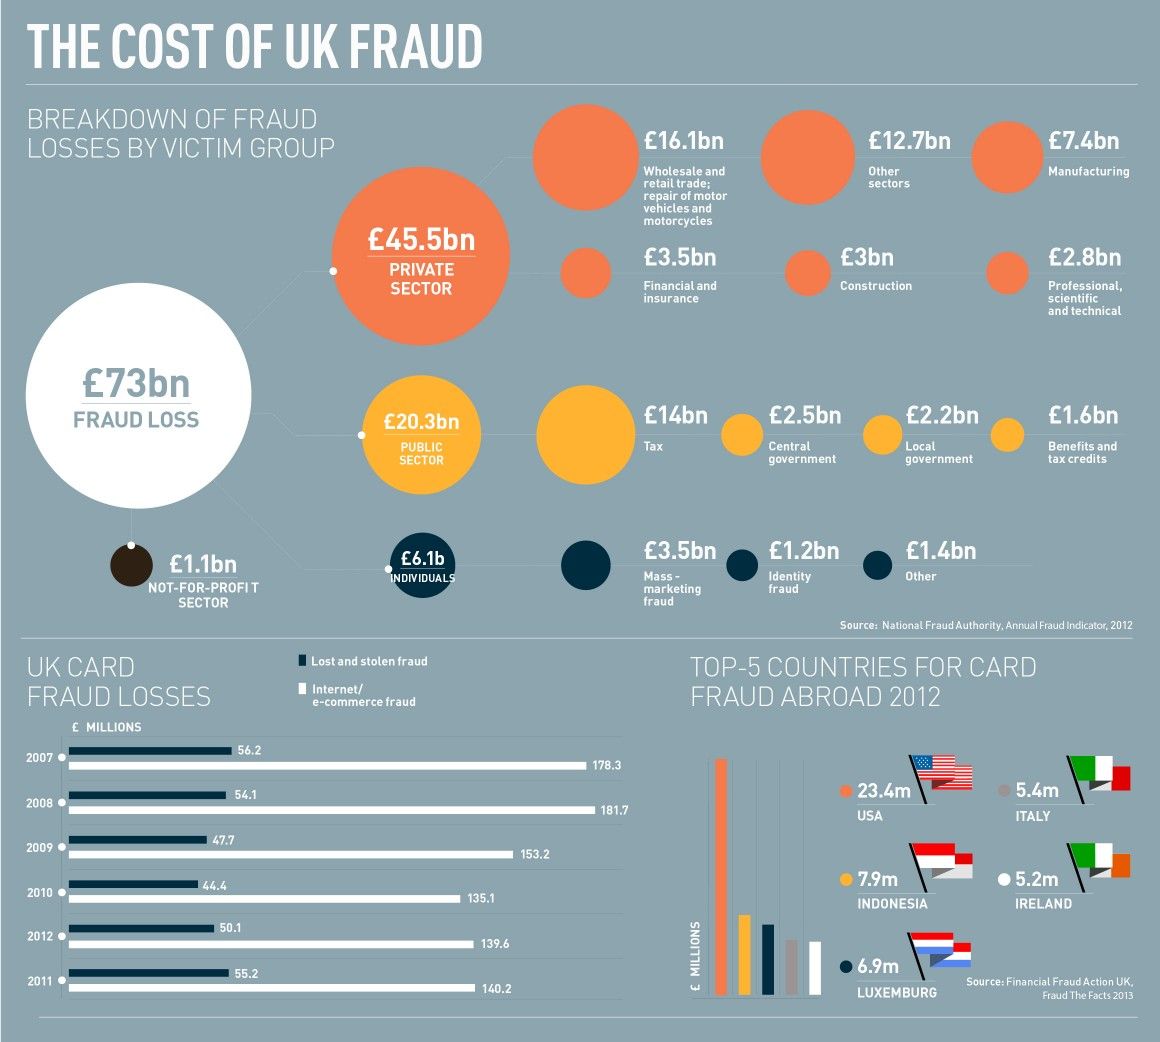 The cost of UK Fraud